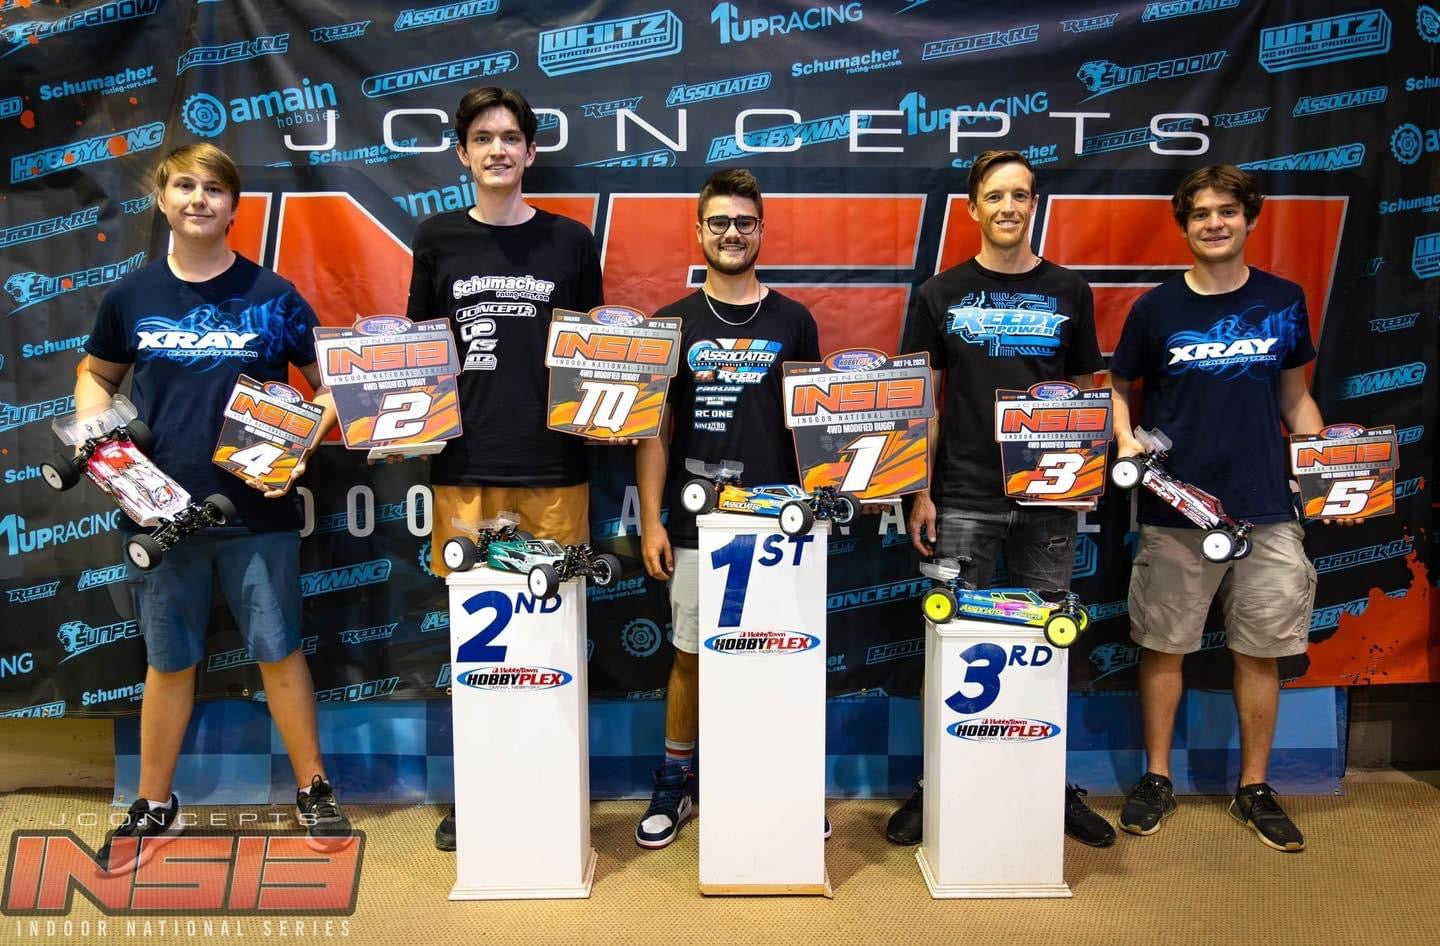 Congrats to the 1up Team at the JConcepts INS series